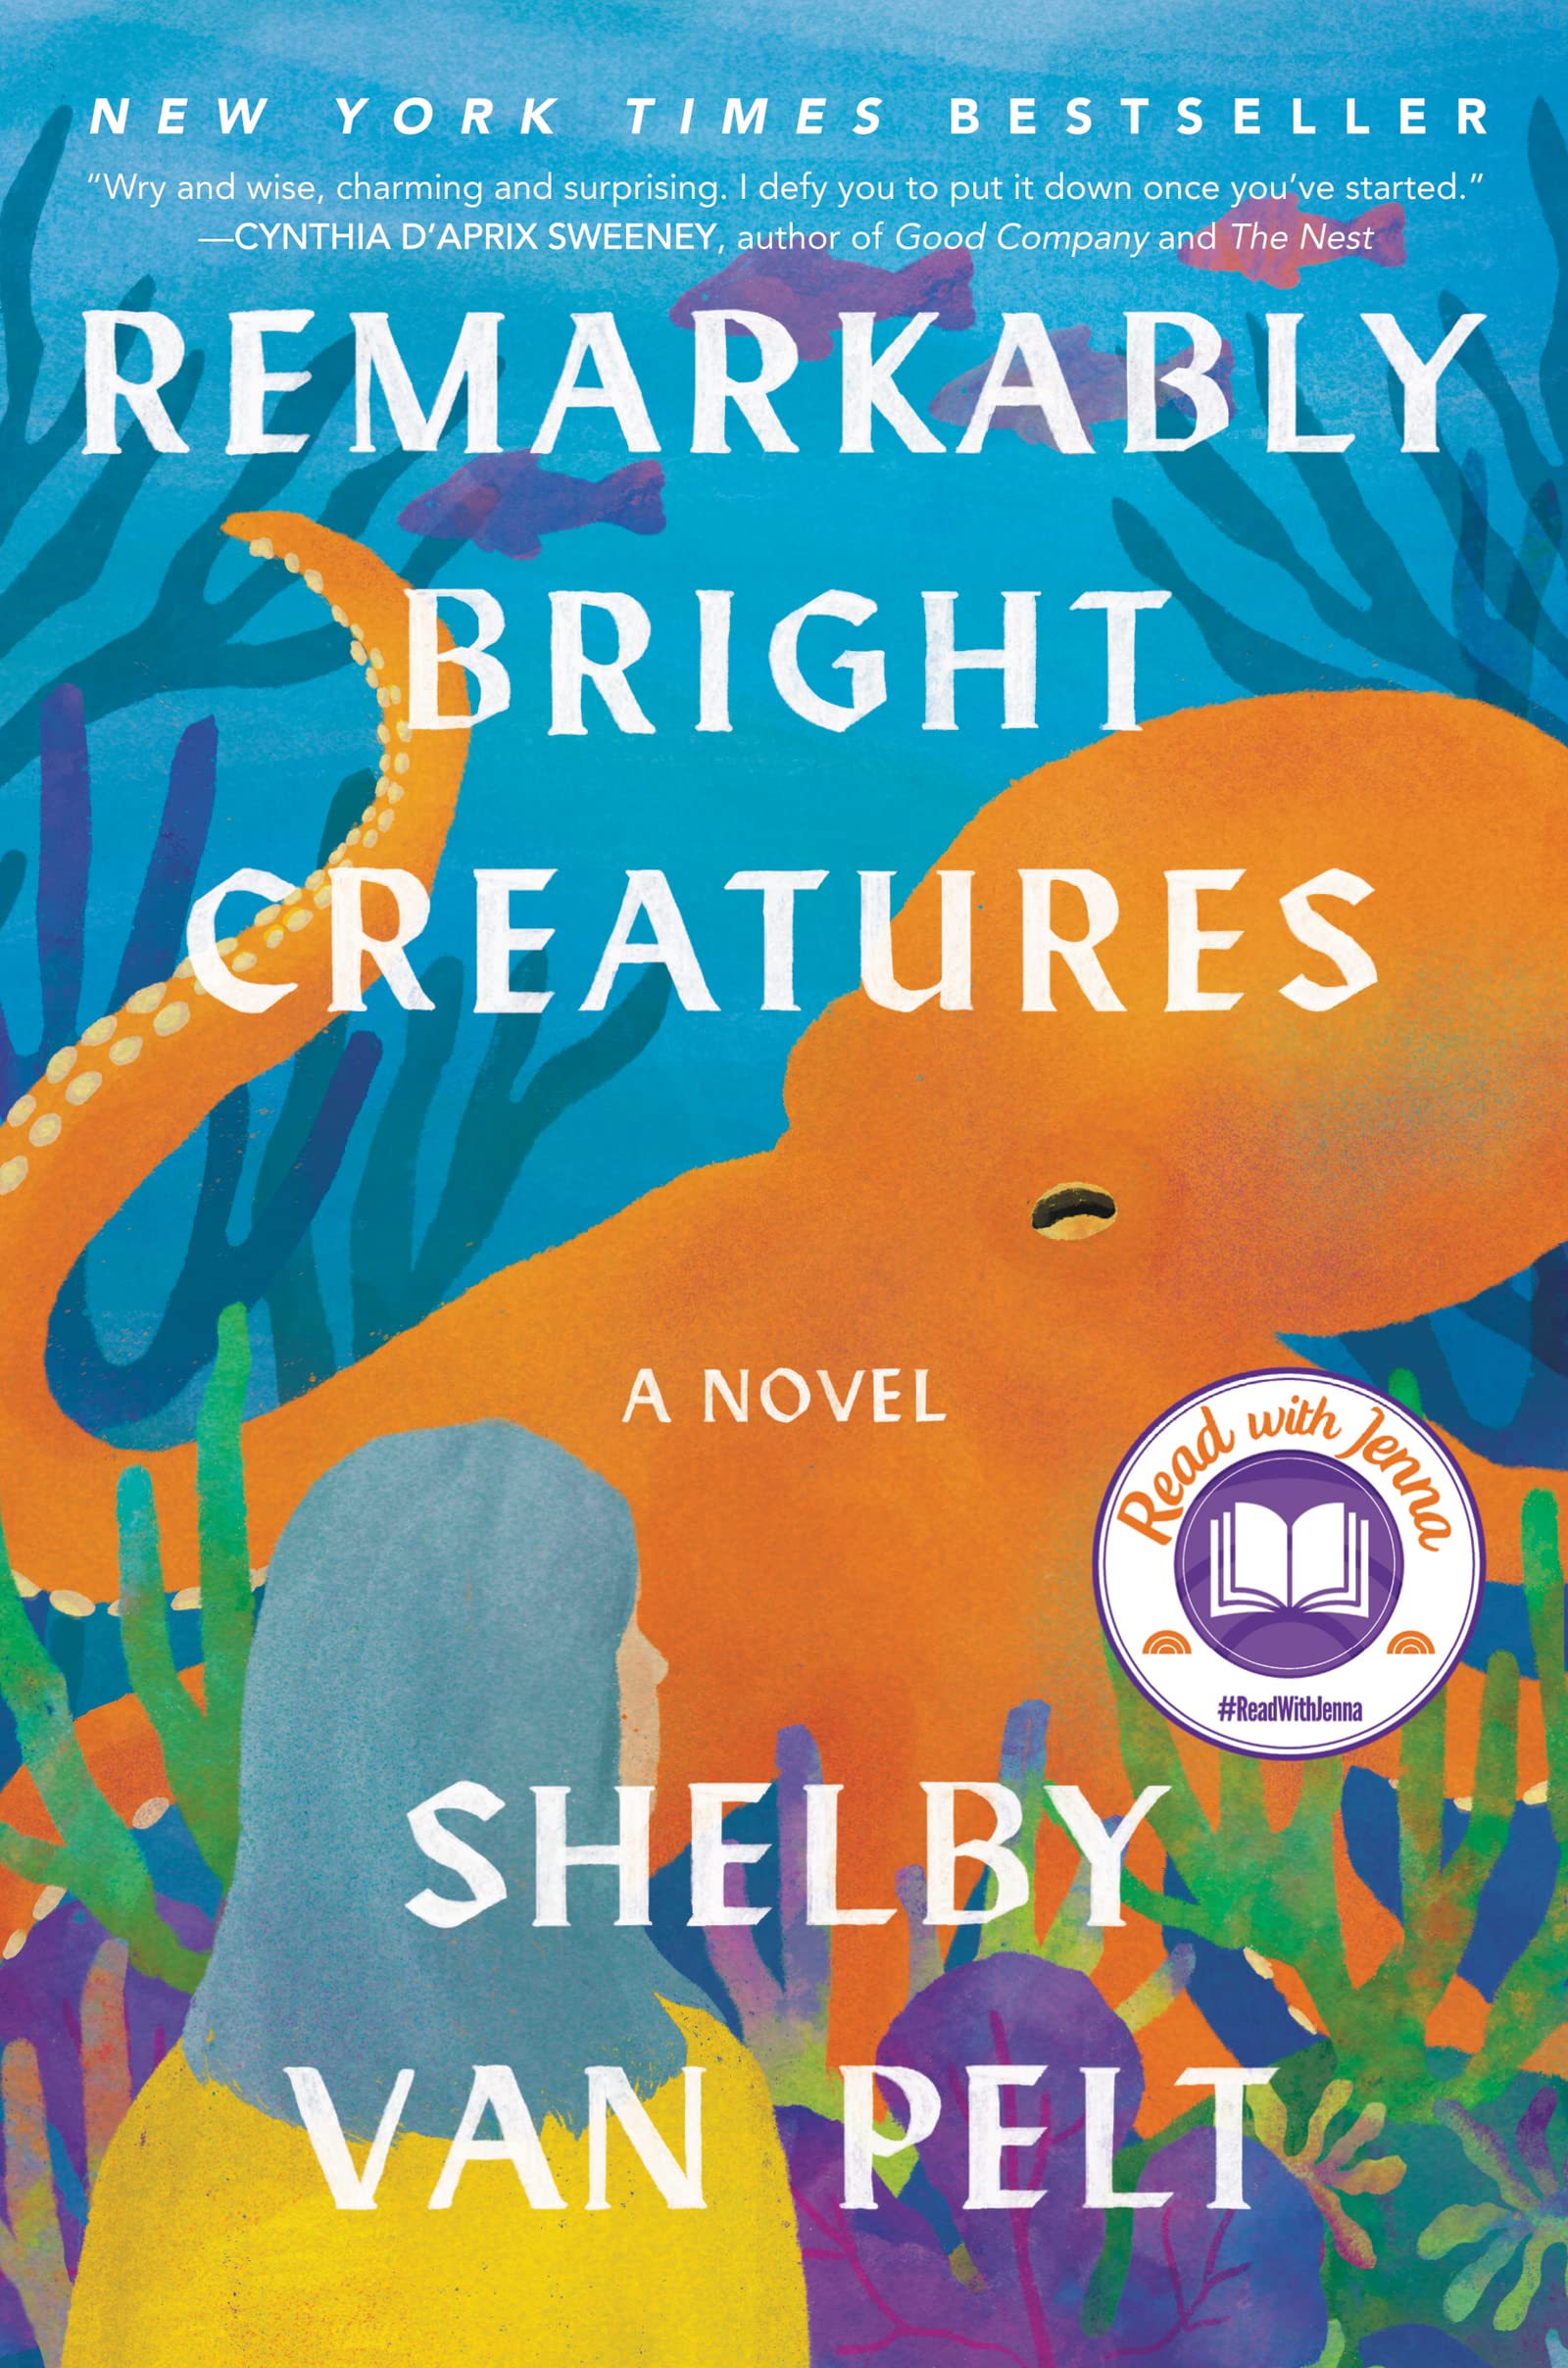 Adult Book Review: Remarkably Bright Creatures | Enid Monthly